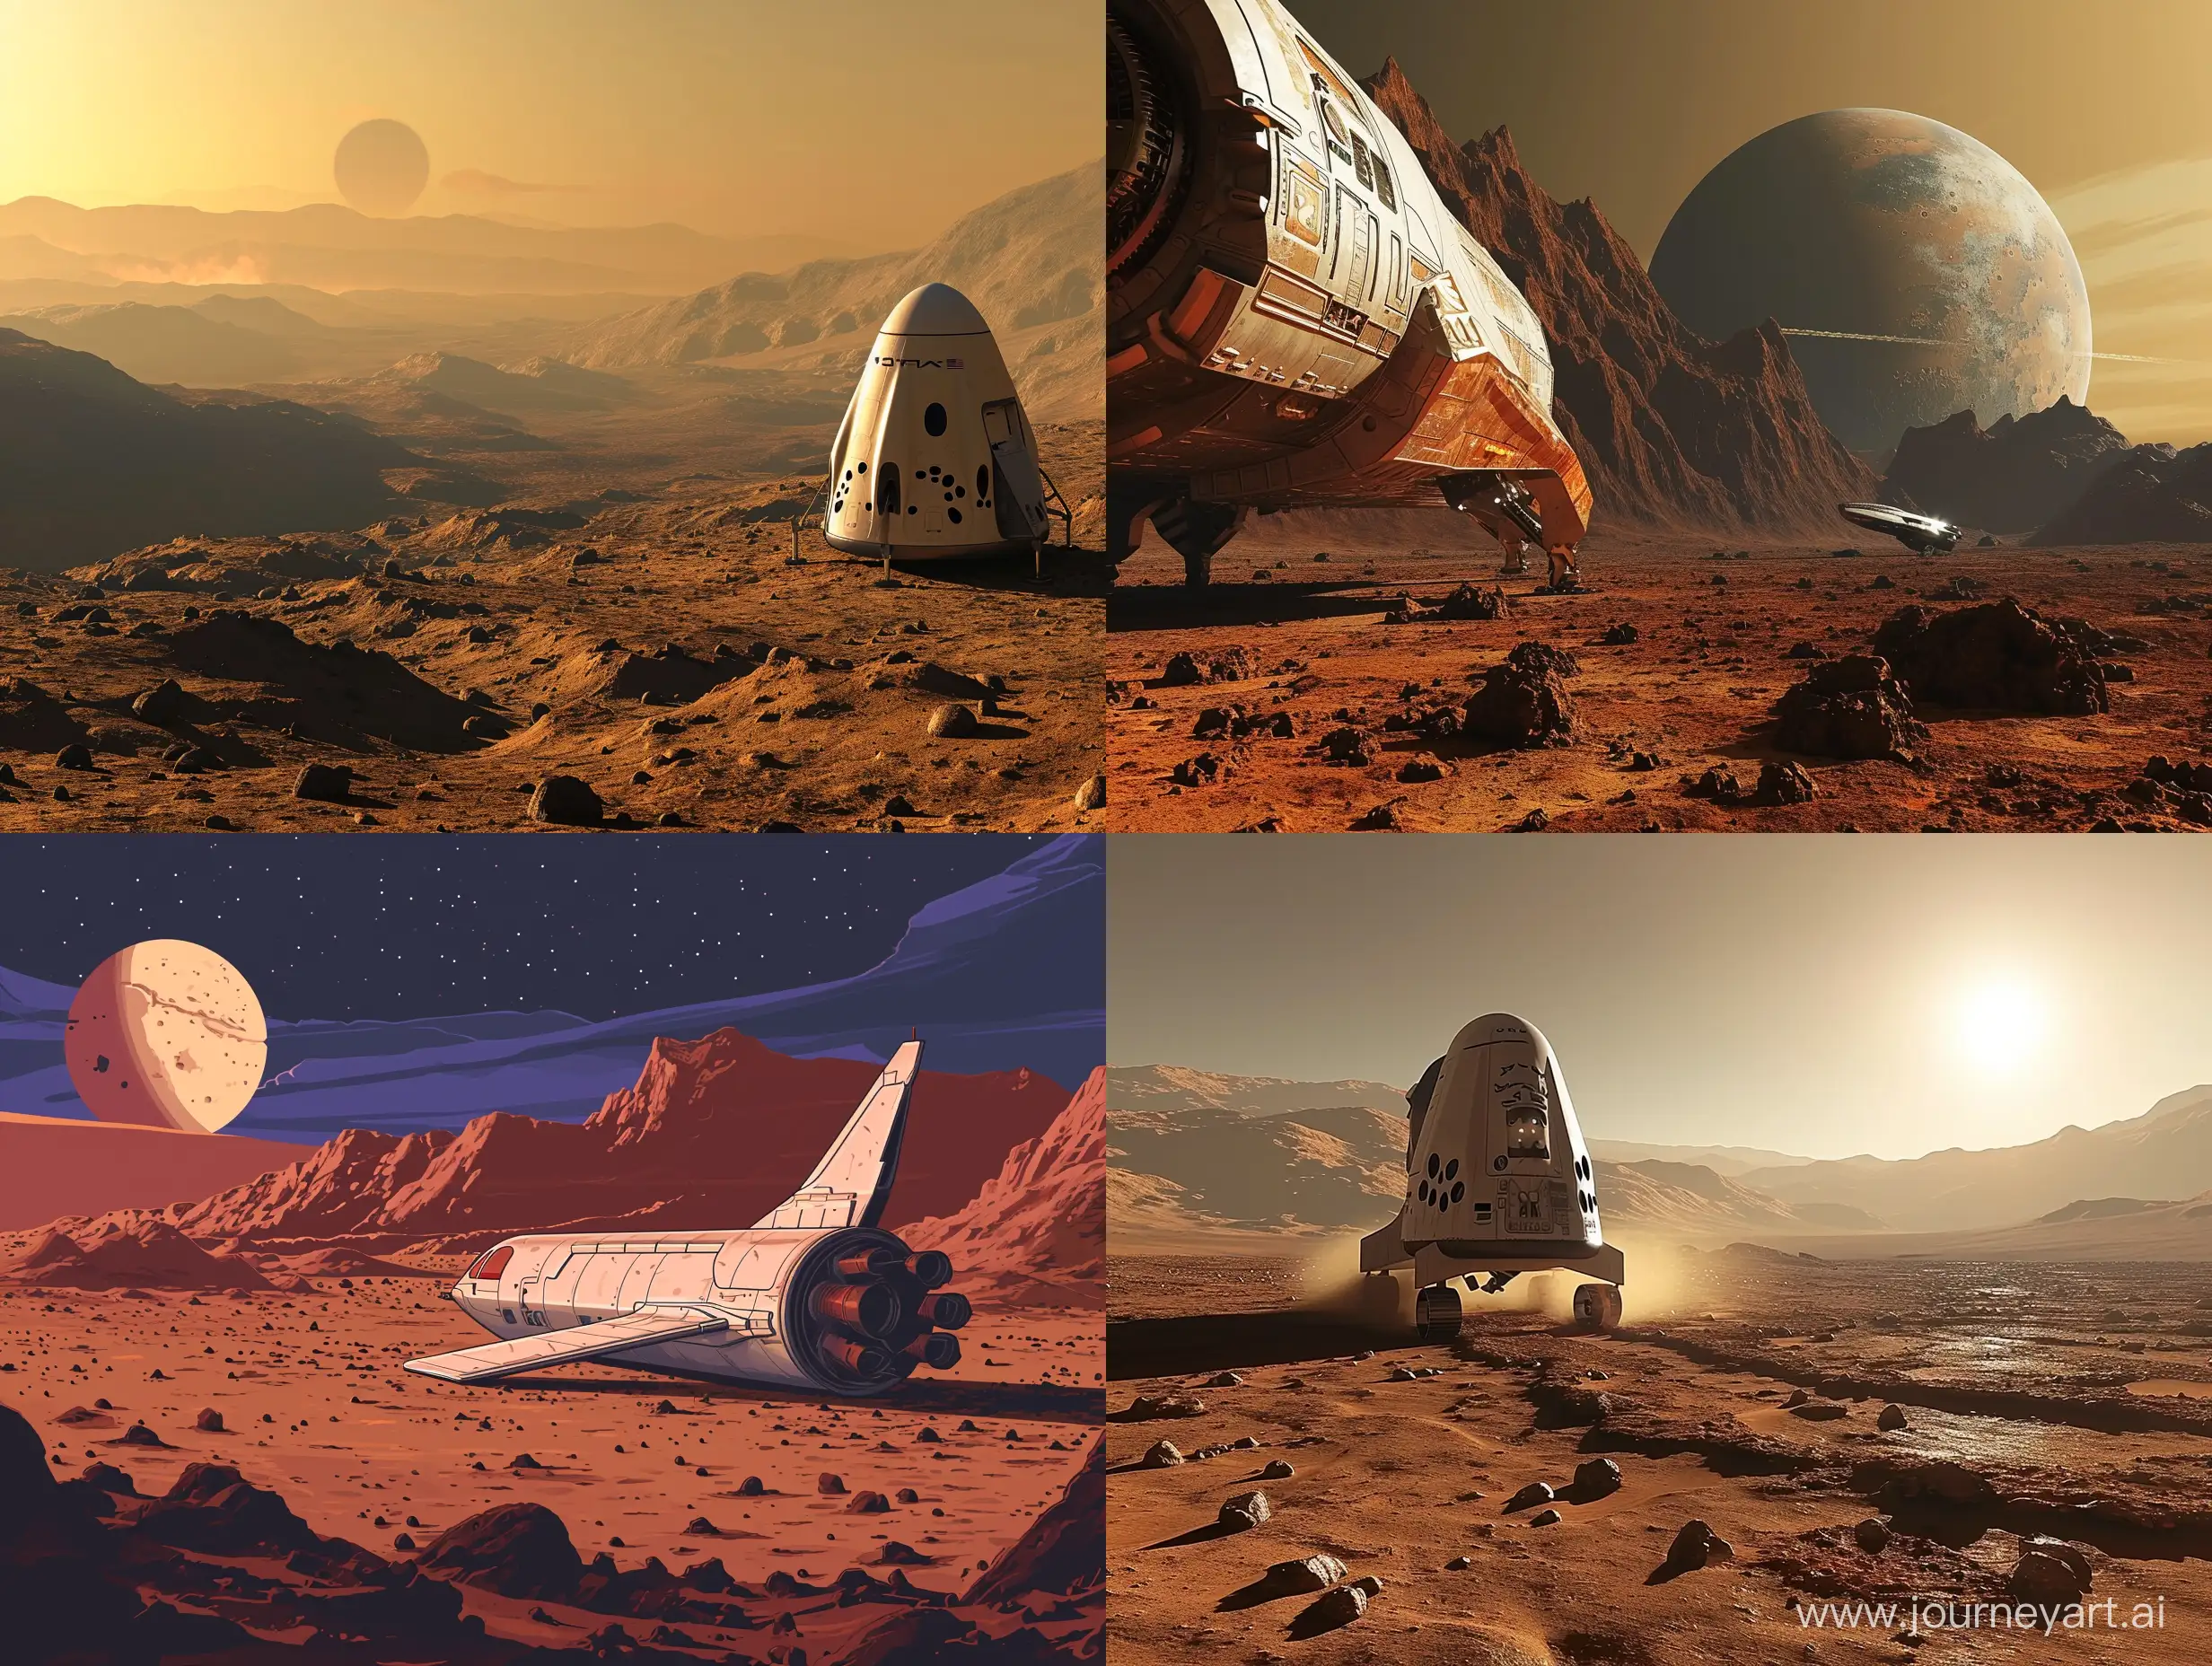 Mars-Landscape-with-Spaceship-Futuristic-Red-Planet-Exploration